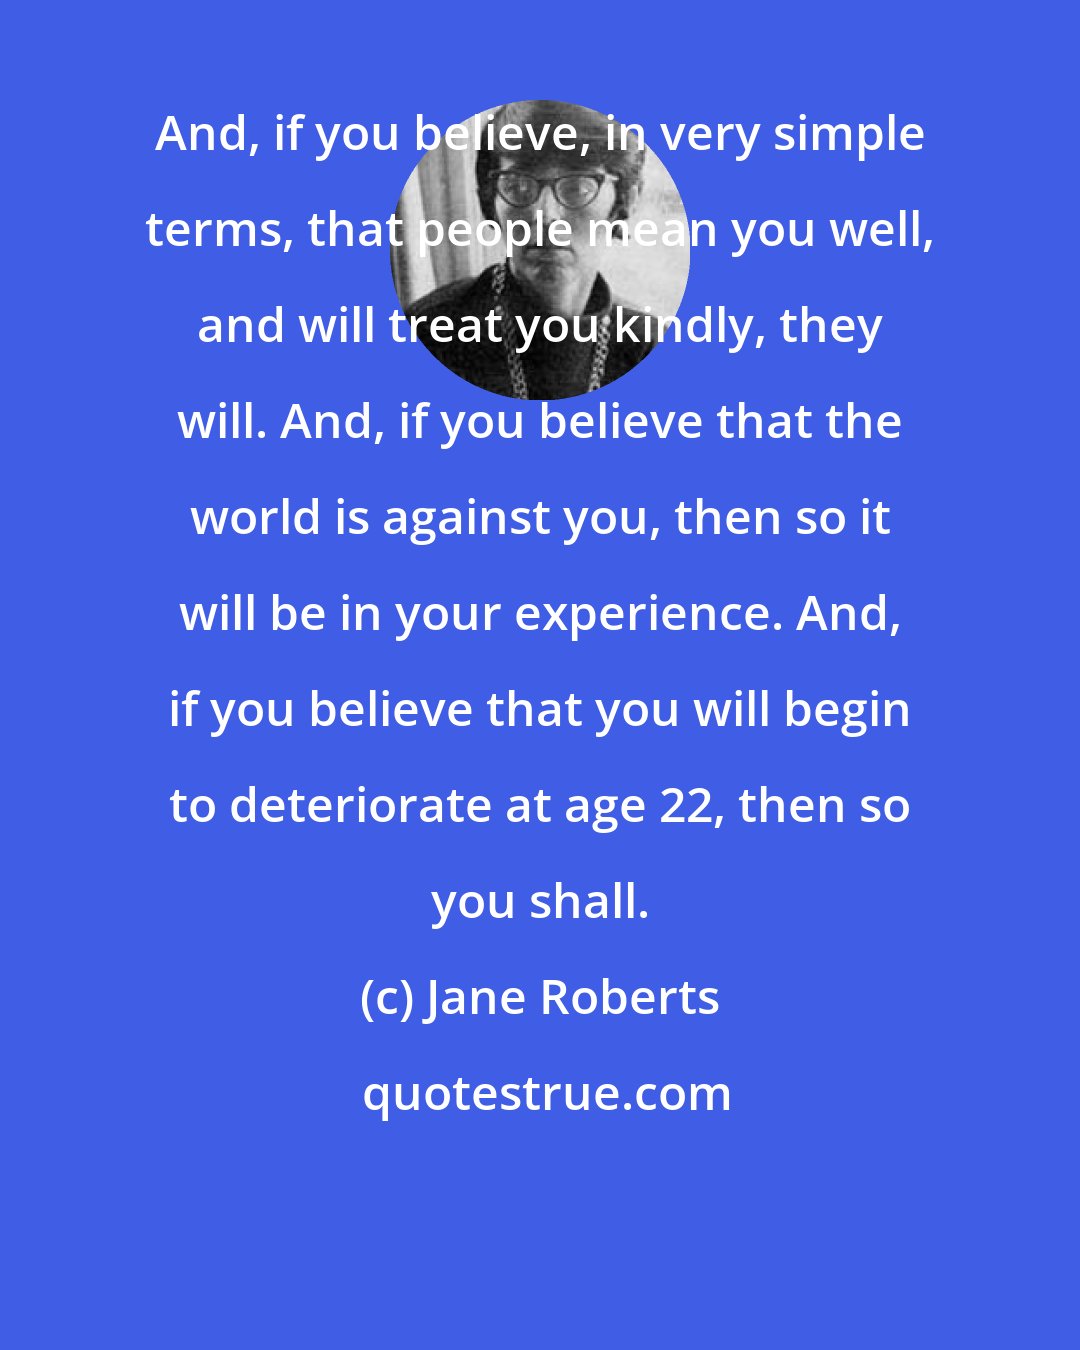 Jane Roberts: And, if you believe, in very simple terms, that people mean you well, and will treat you kindly, they will. And, if you believe that the world is against you, then so it will be in your experience. And, if you believe that you will begin to deteriorate at age 22, then so you shall.